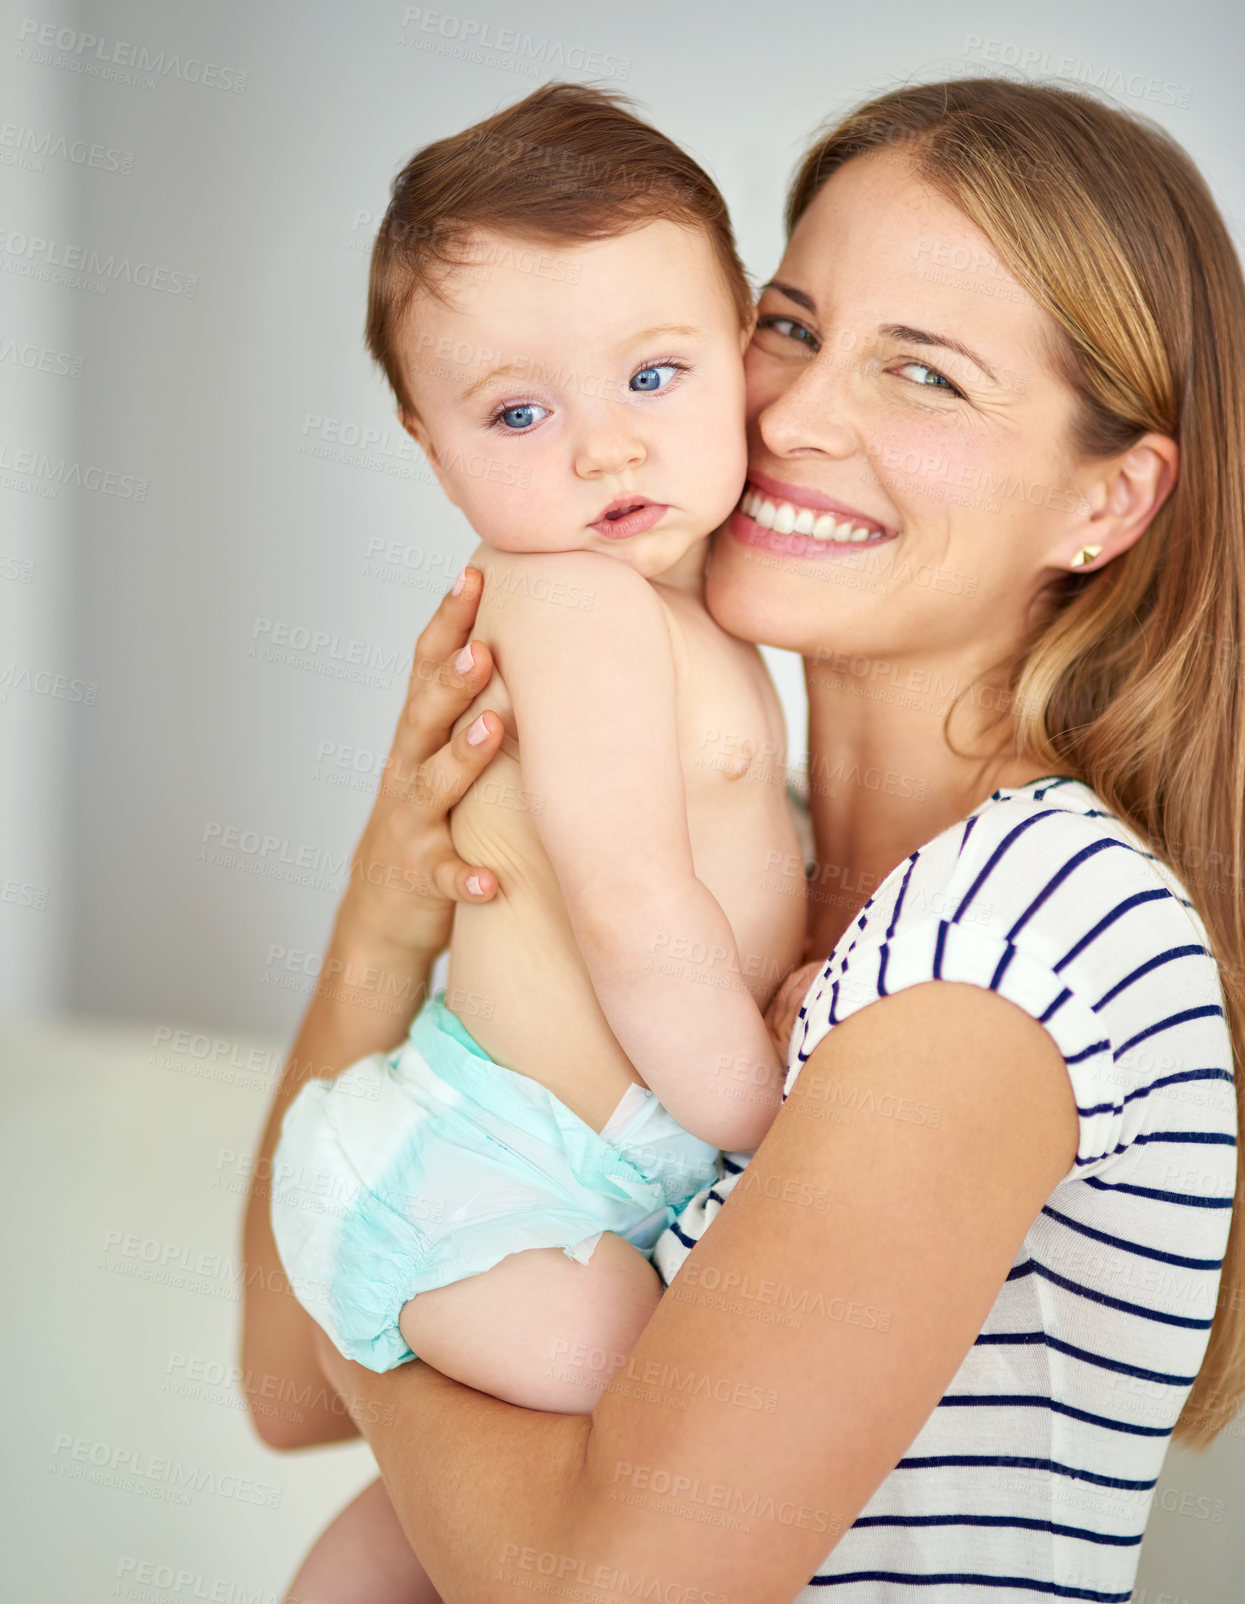 Buy stock photo Shot of a mother bonding with her adorable baby girl